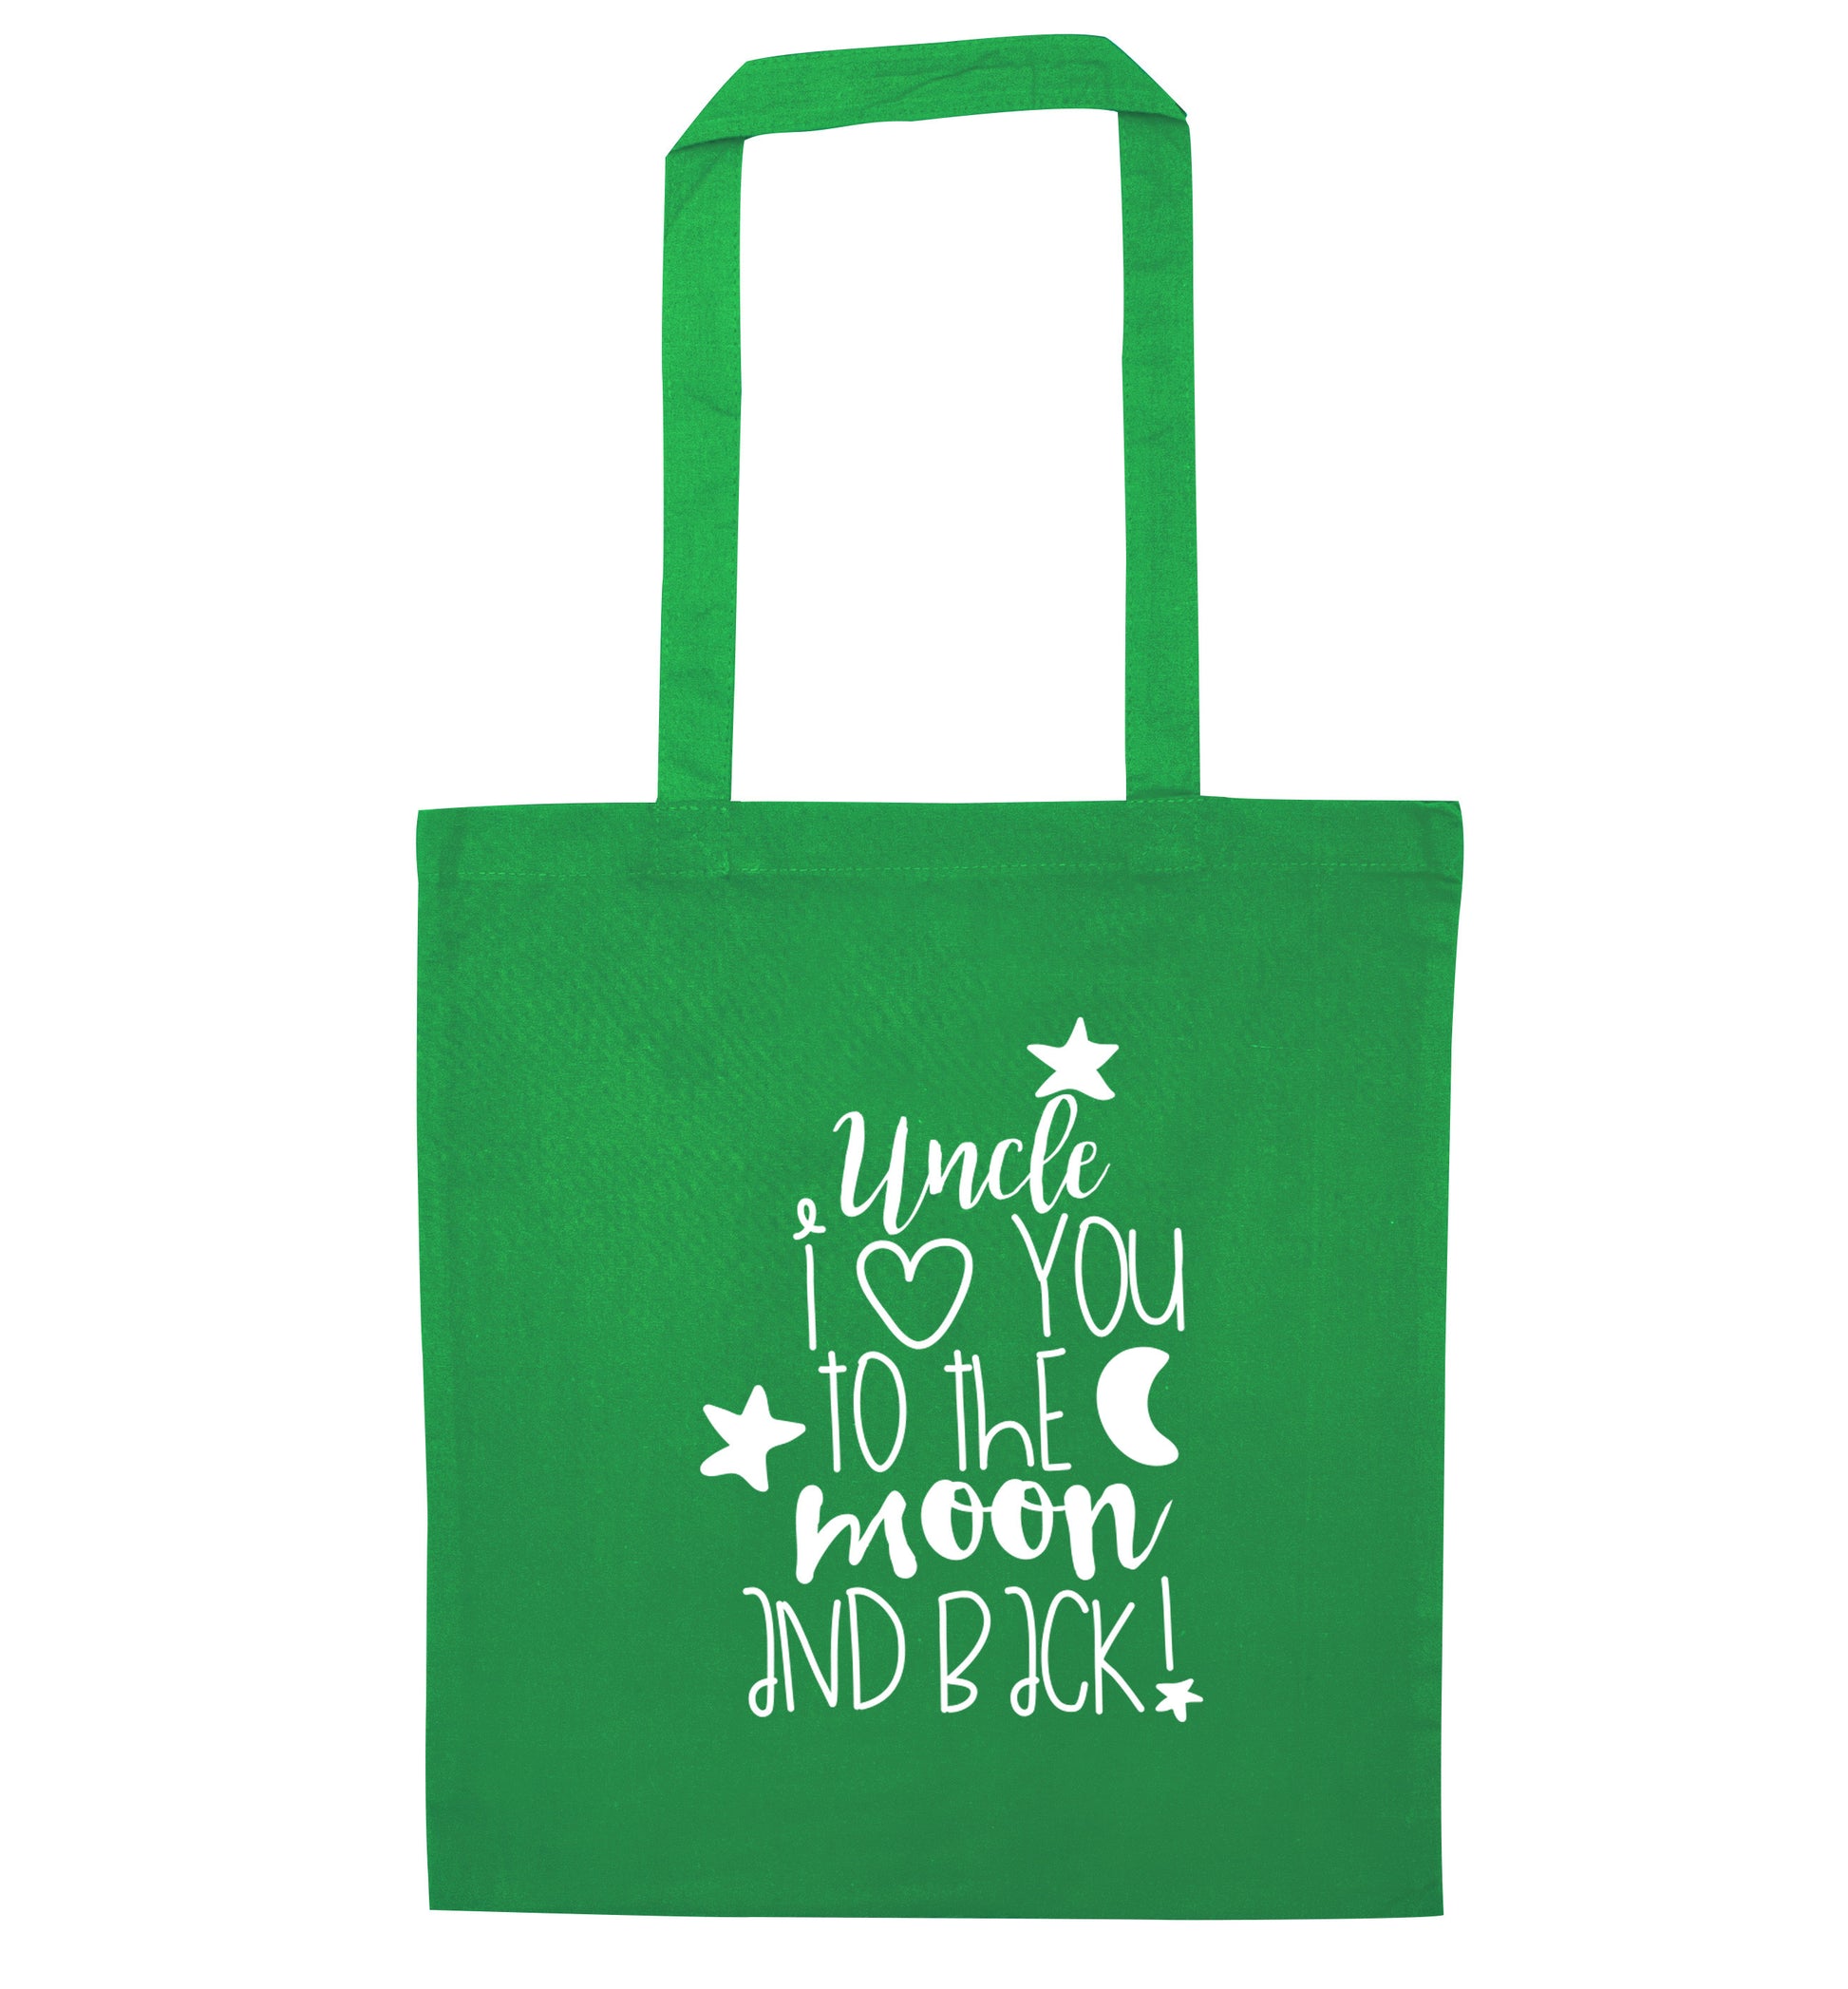 Uncle I love you to the moon and back green tote bag